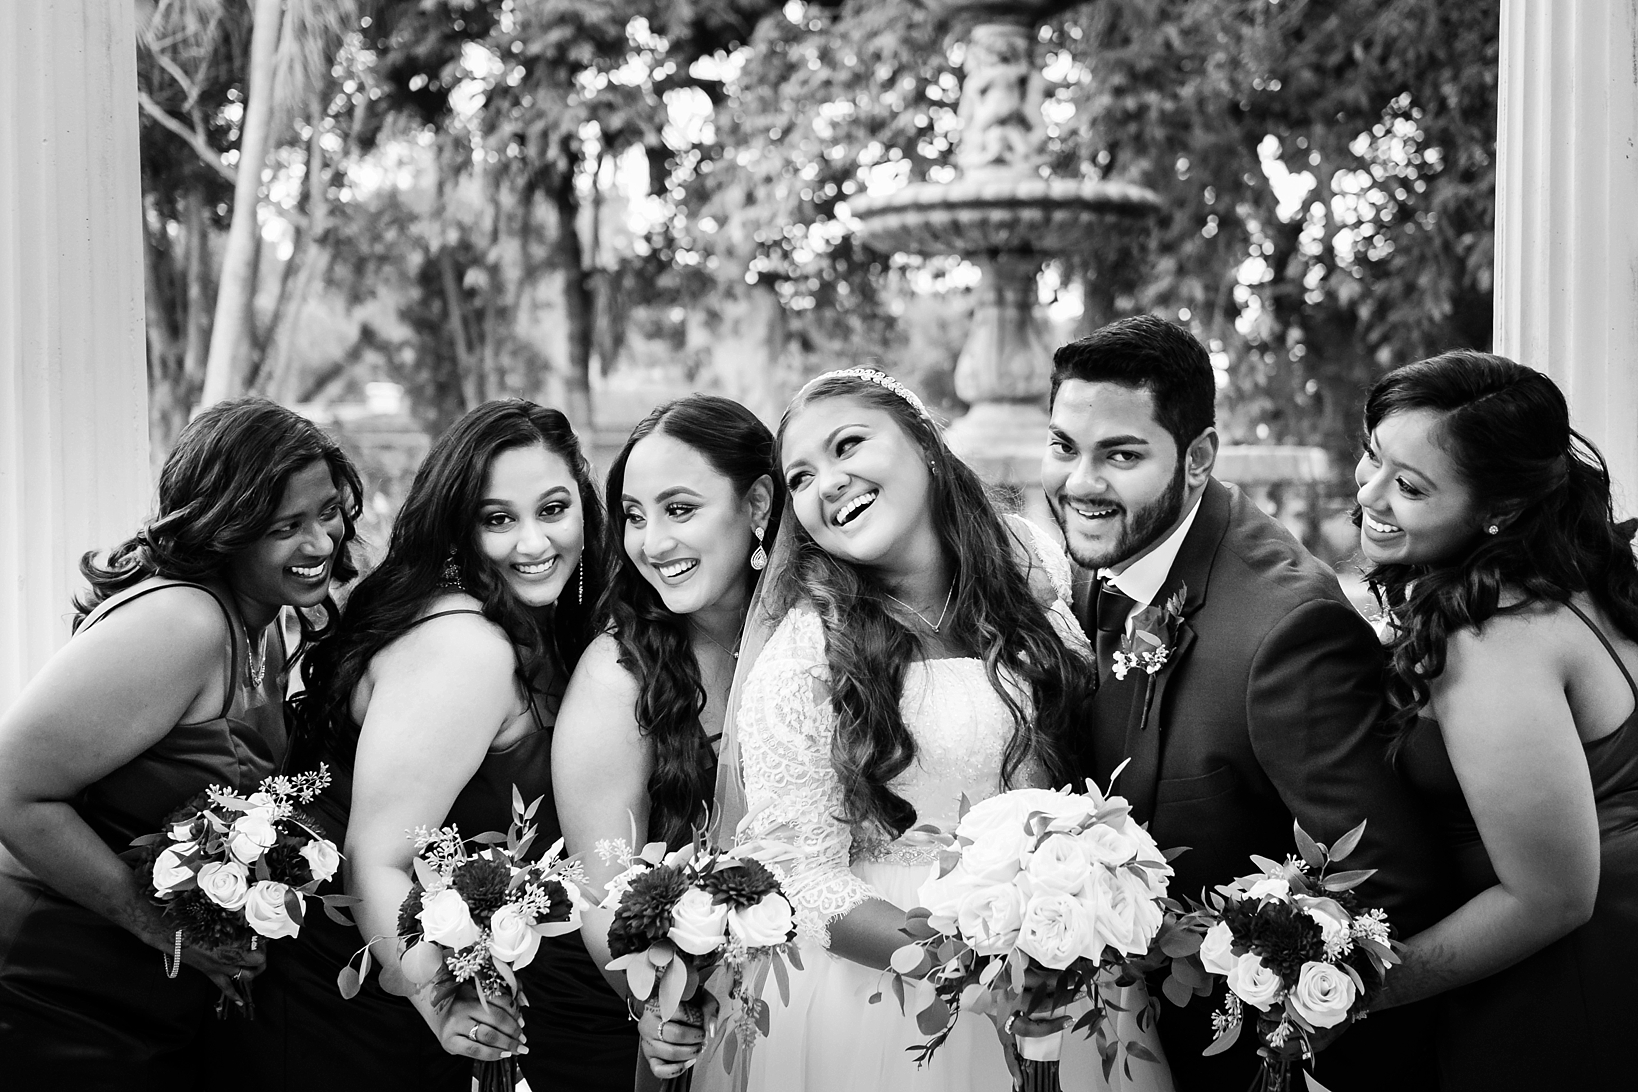 A candid moment between the bride and her bridal party by Sarah & Ben Photography